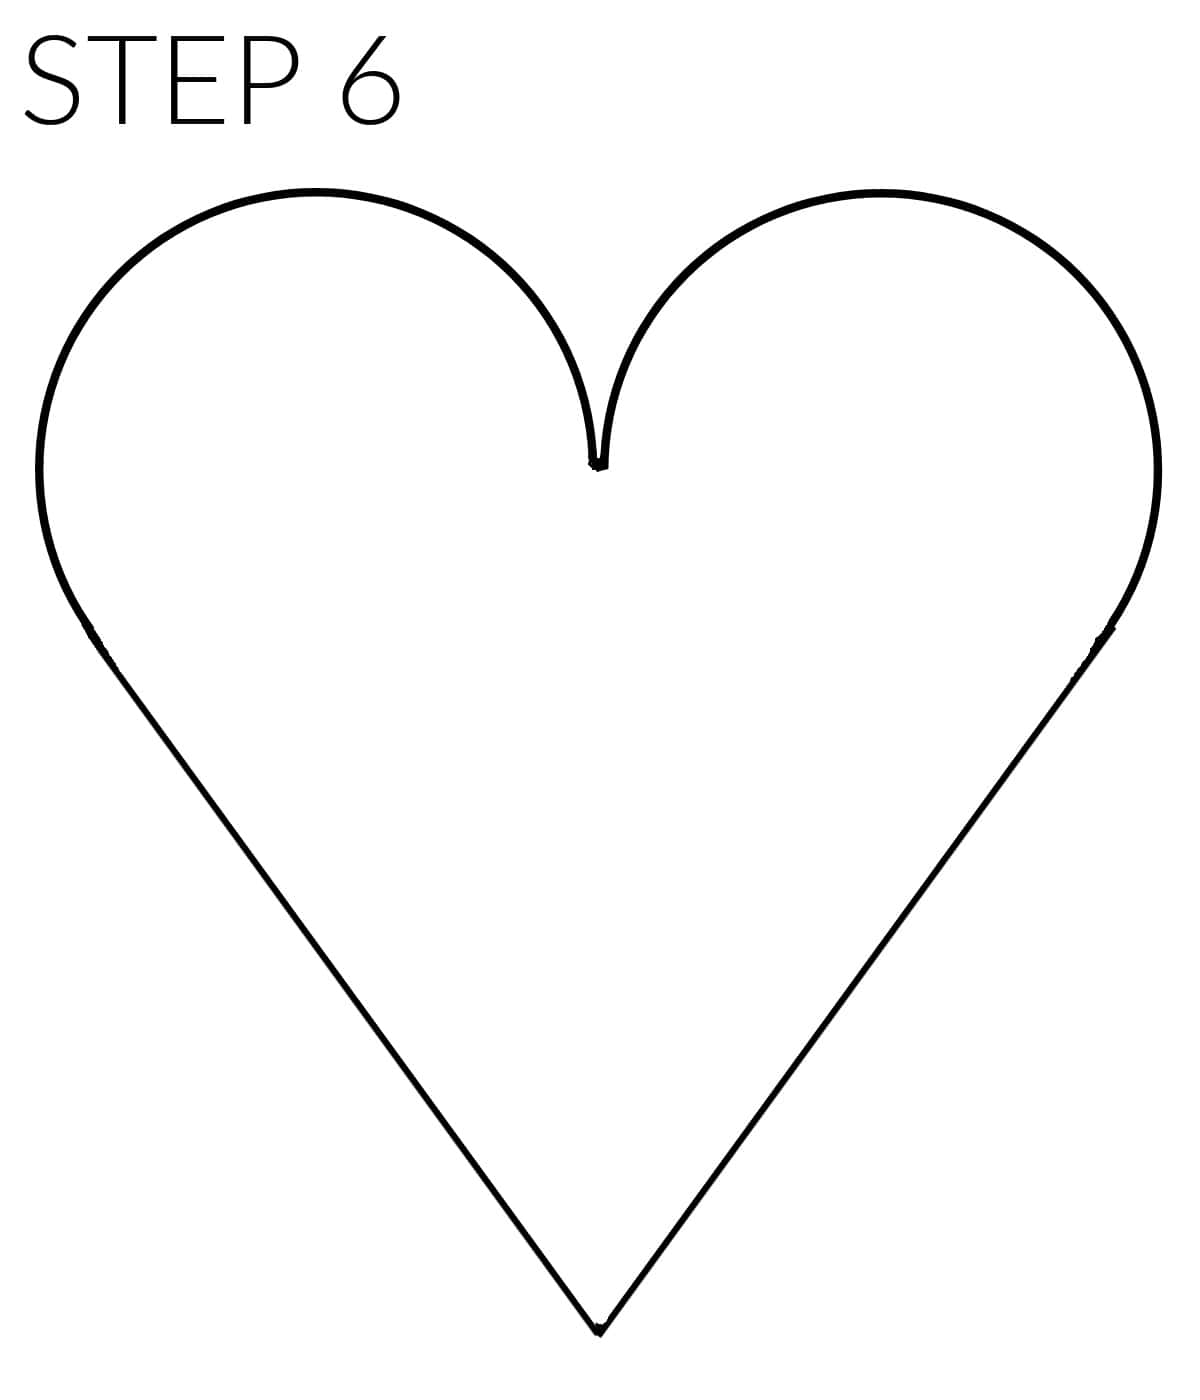 step 6 heart drawing easy